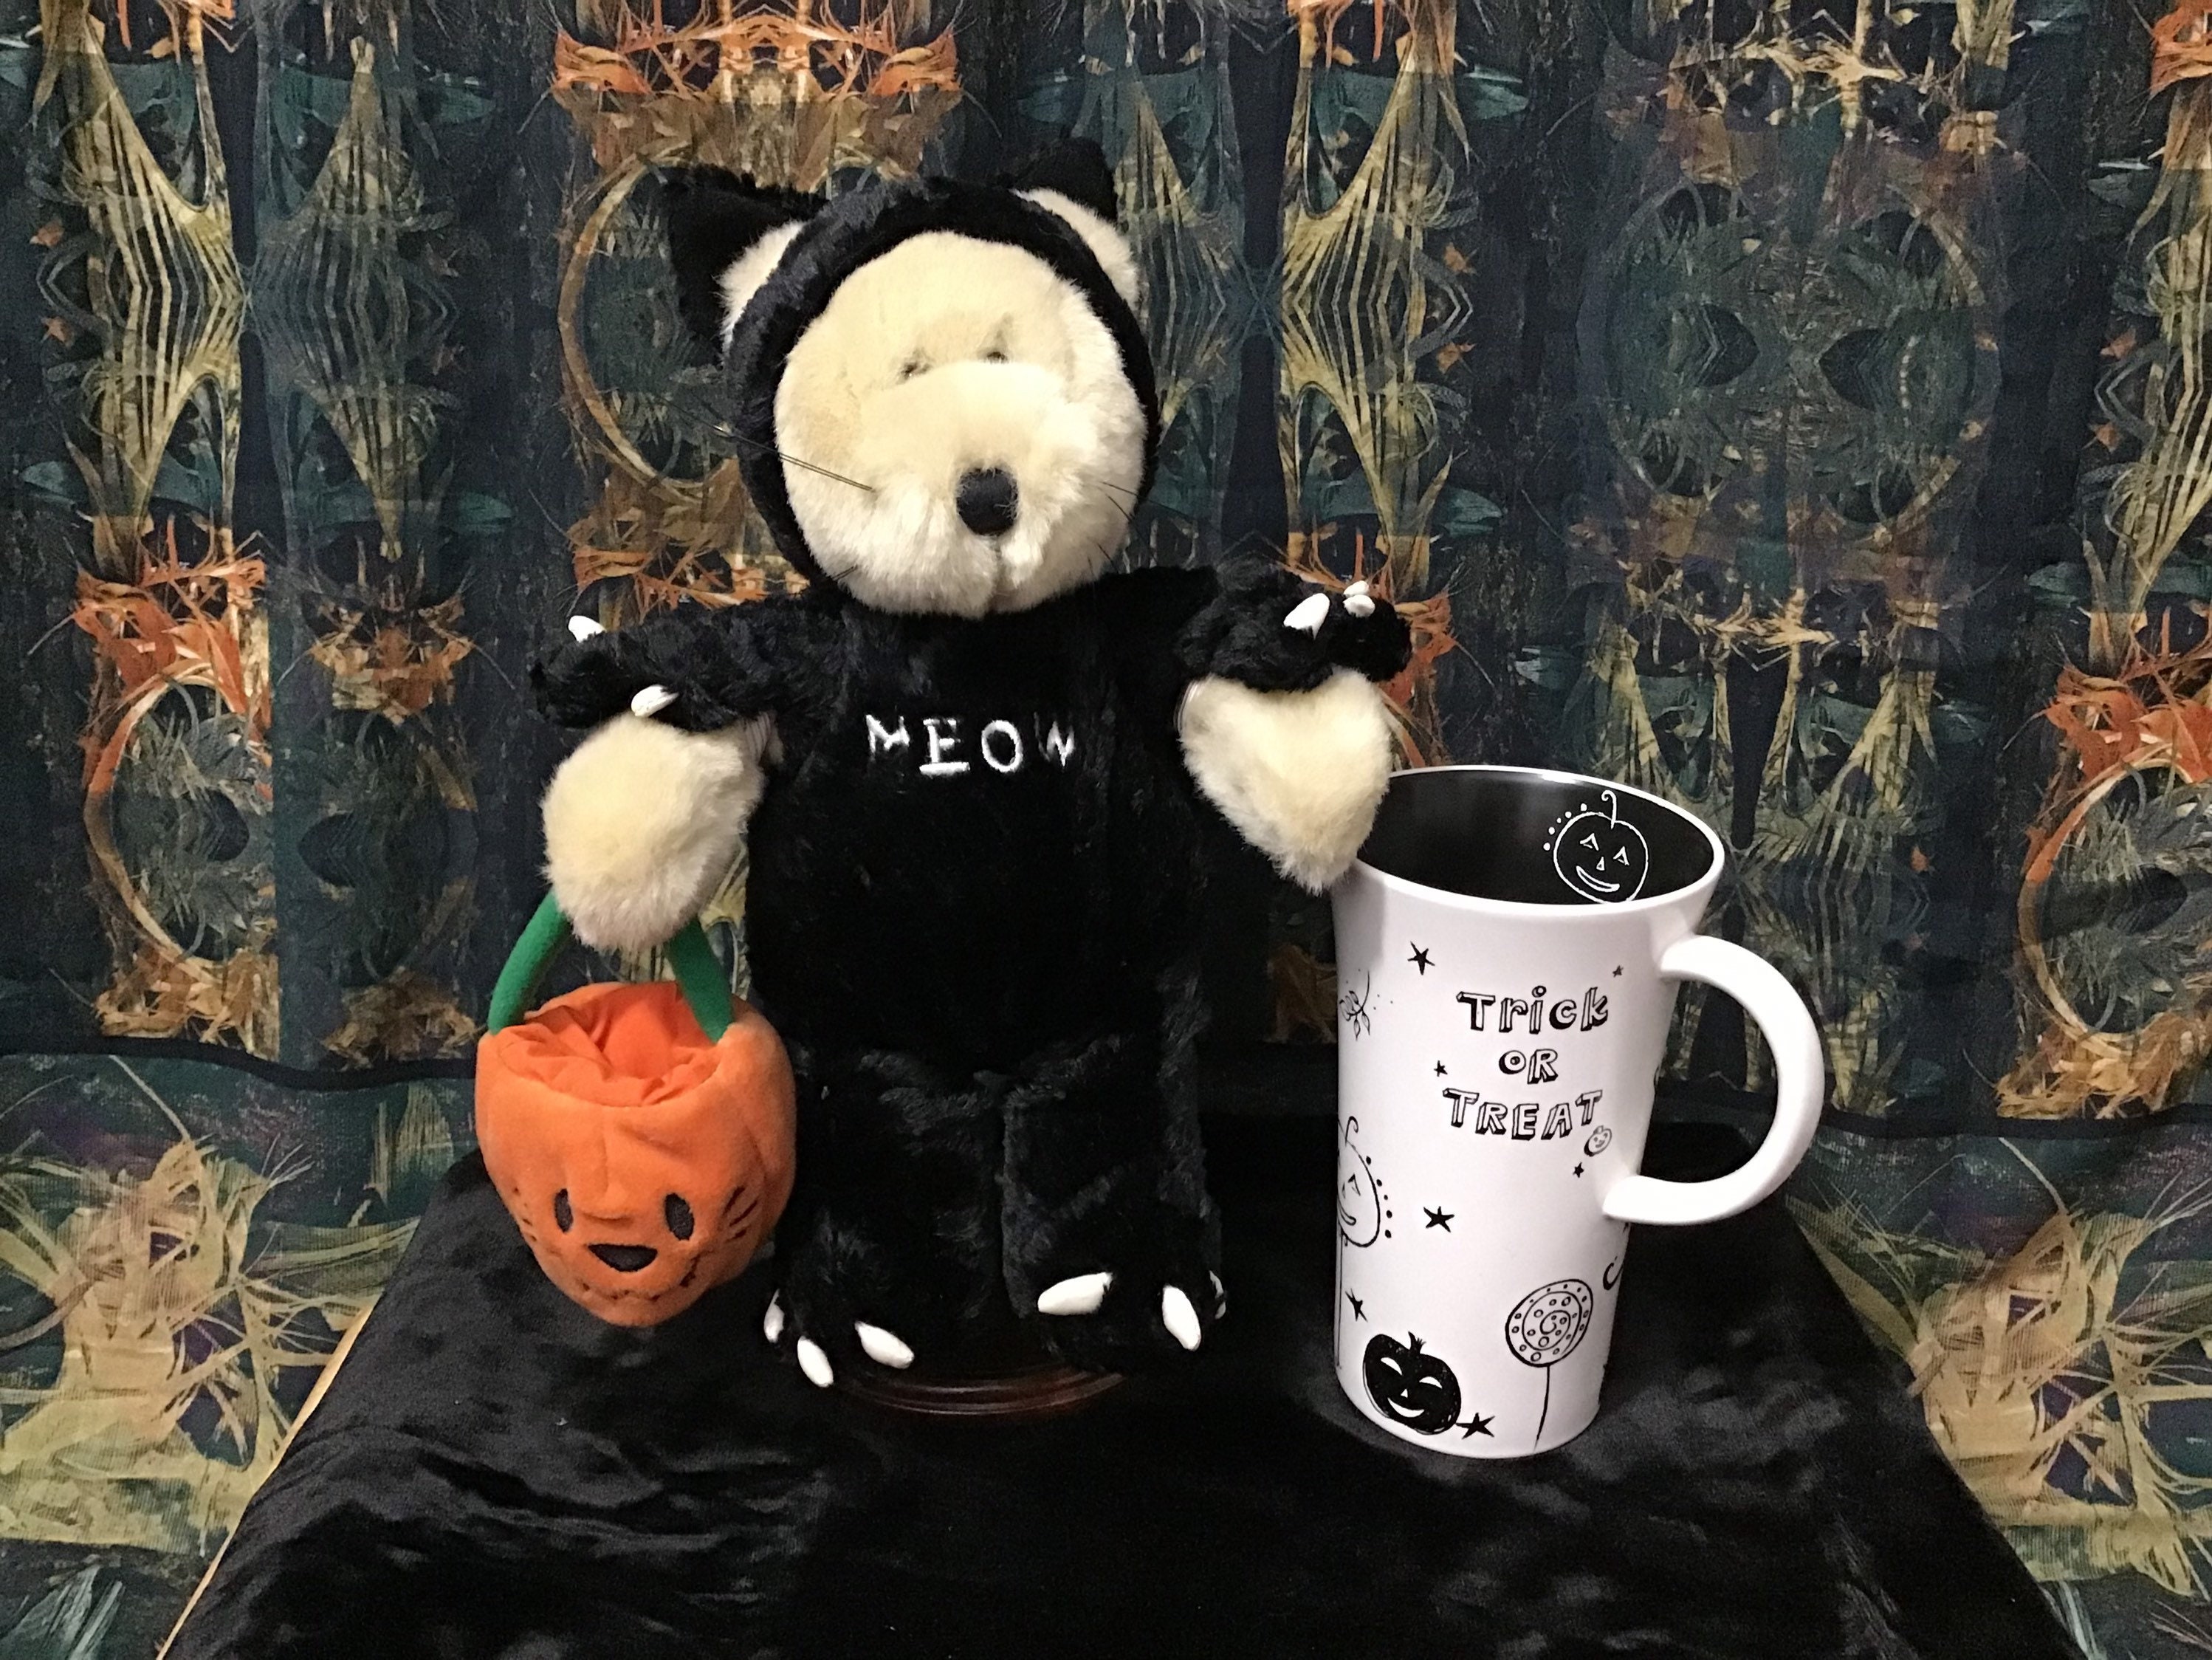 Starbucks New Bear Cup - Where To Find Starbucks Bearista Cup